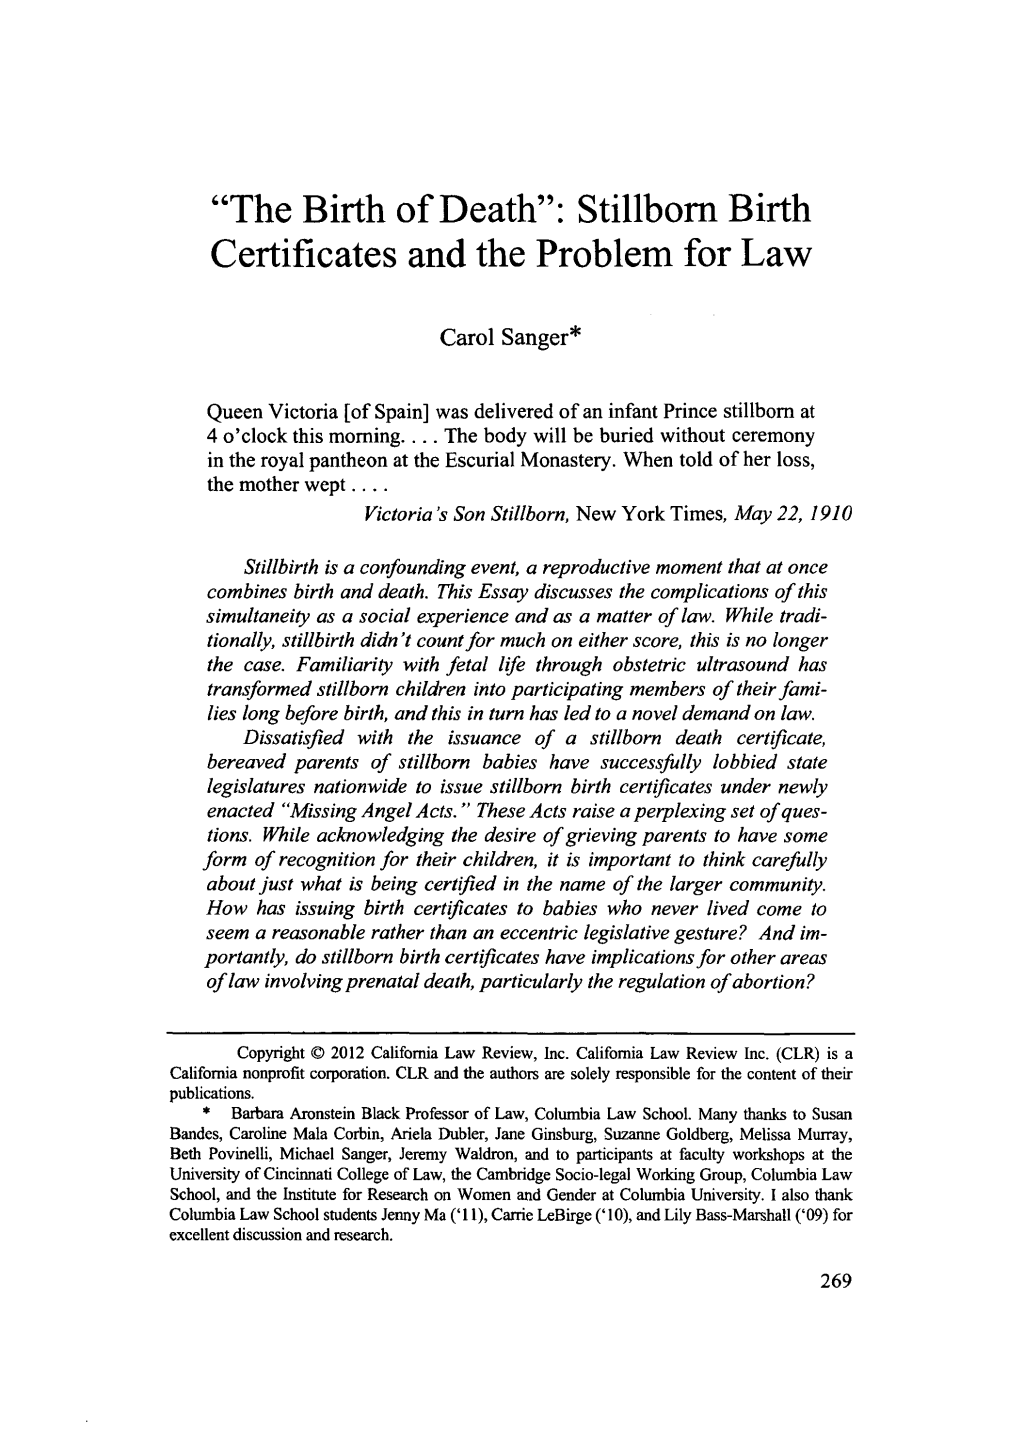 "The Birth of Death": Stillborn Birth Certificates and the Problem for Law